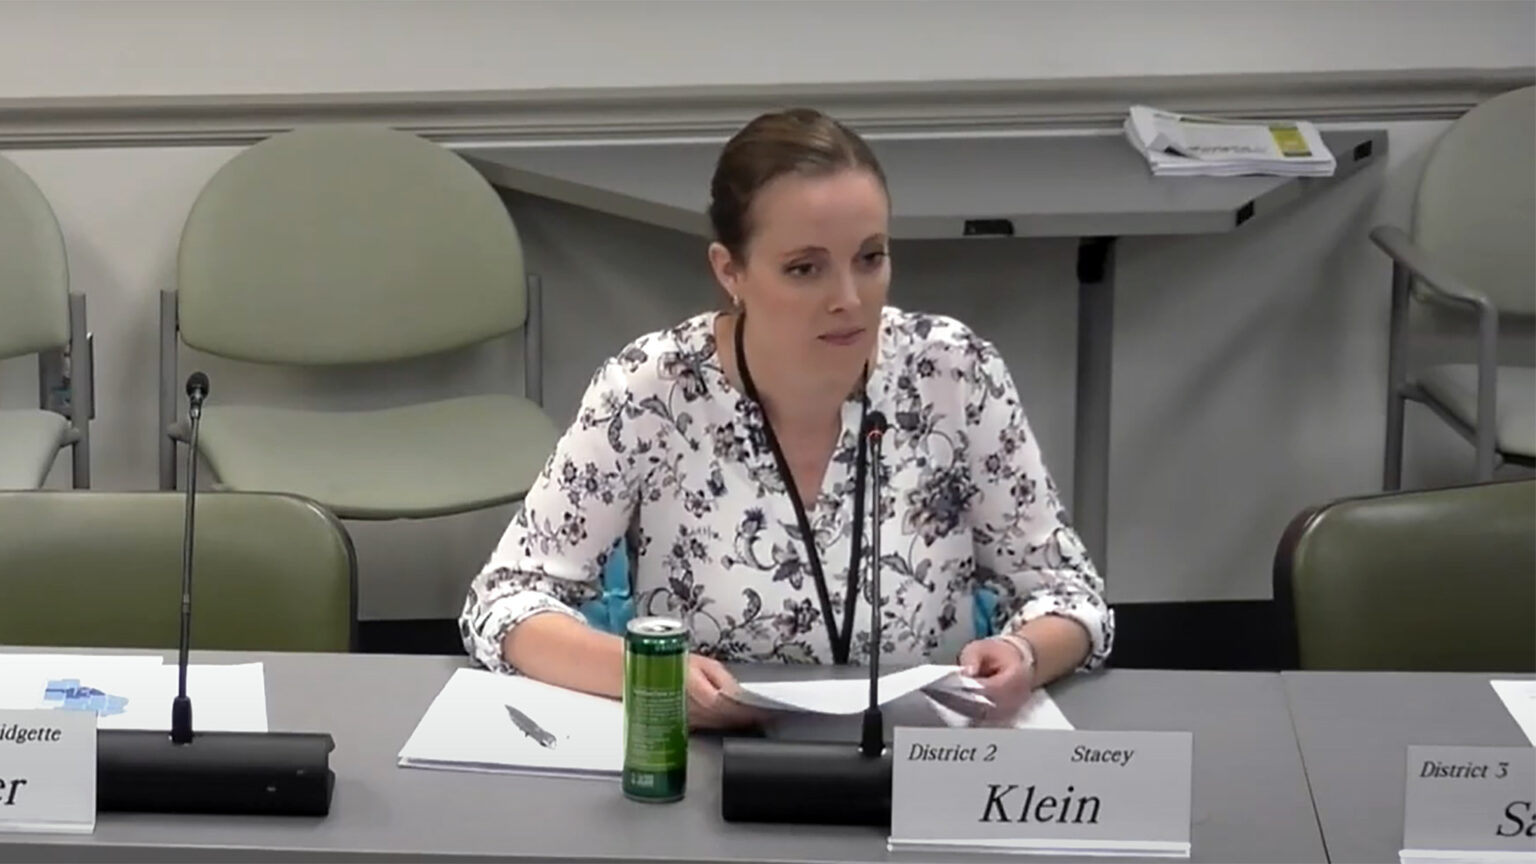 Stacey Klein sits at a table and speaks into a microphone while holding a piece of paper, with a nameplate in front of her reading District 2 and Stacey Klein, empty chairs on either side of her, and more empty chairs placed against a wall in the background.